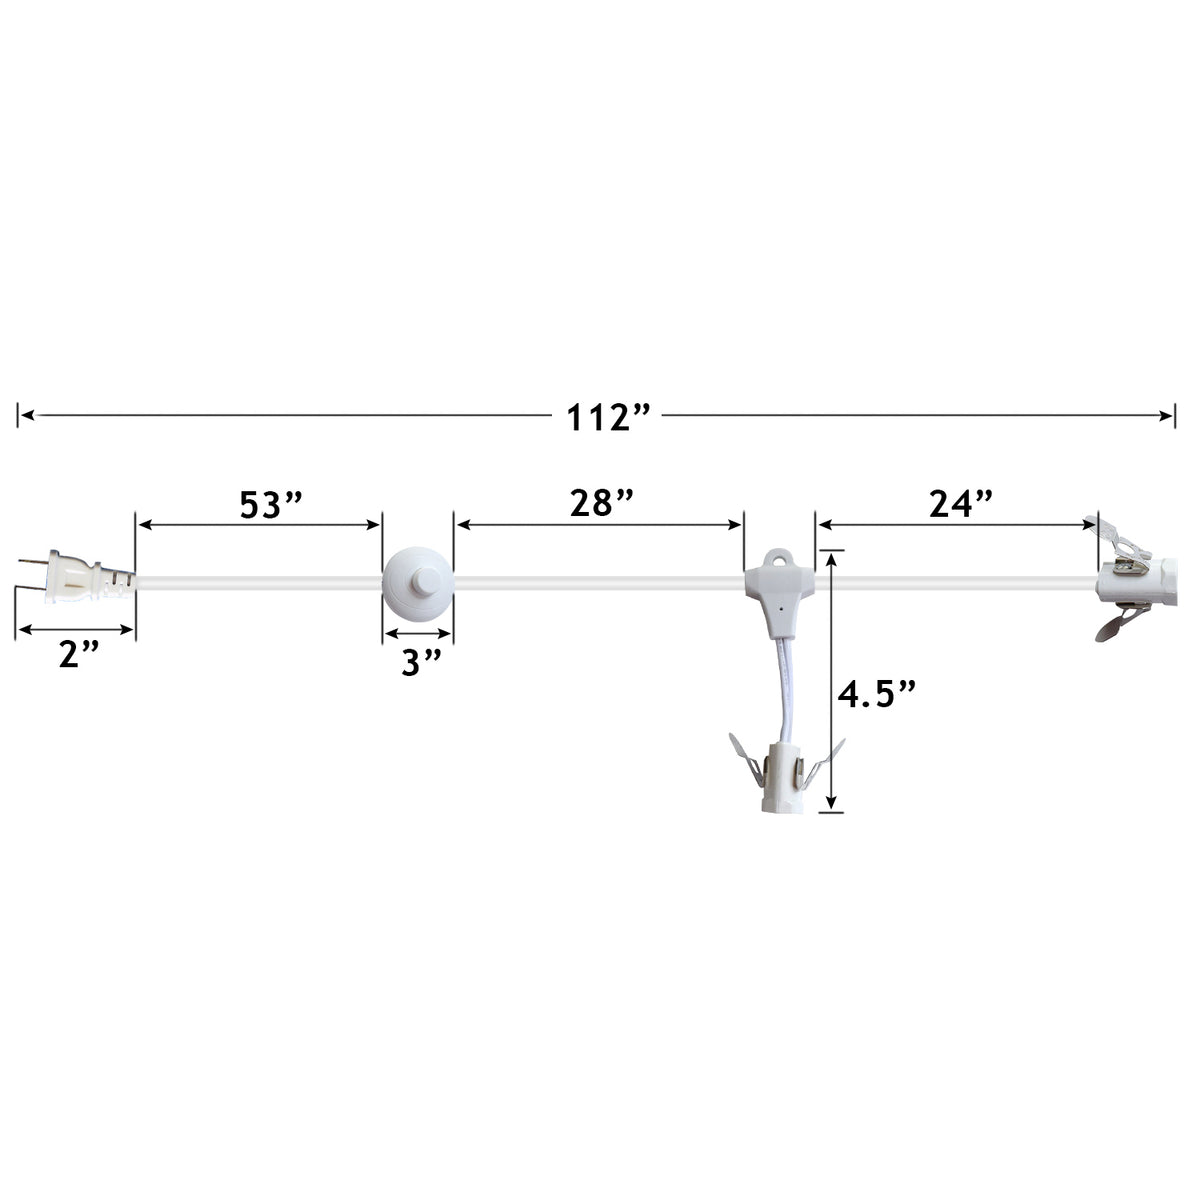 Floor Lamp Cord Measurements from Plug to Foot Switch to Light Sockets